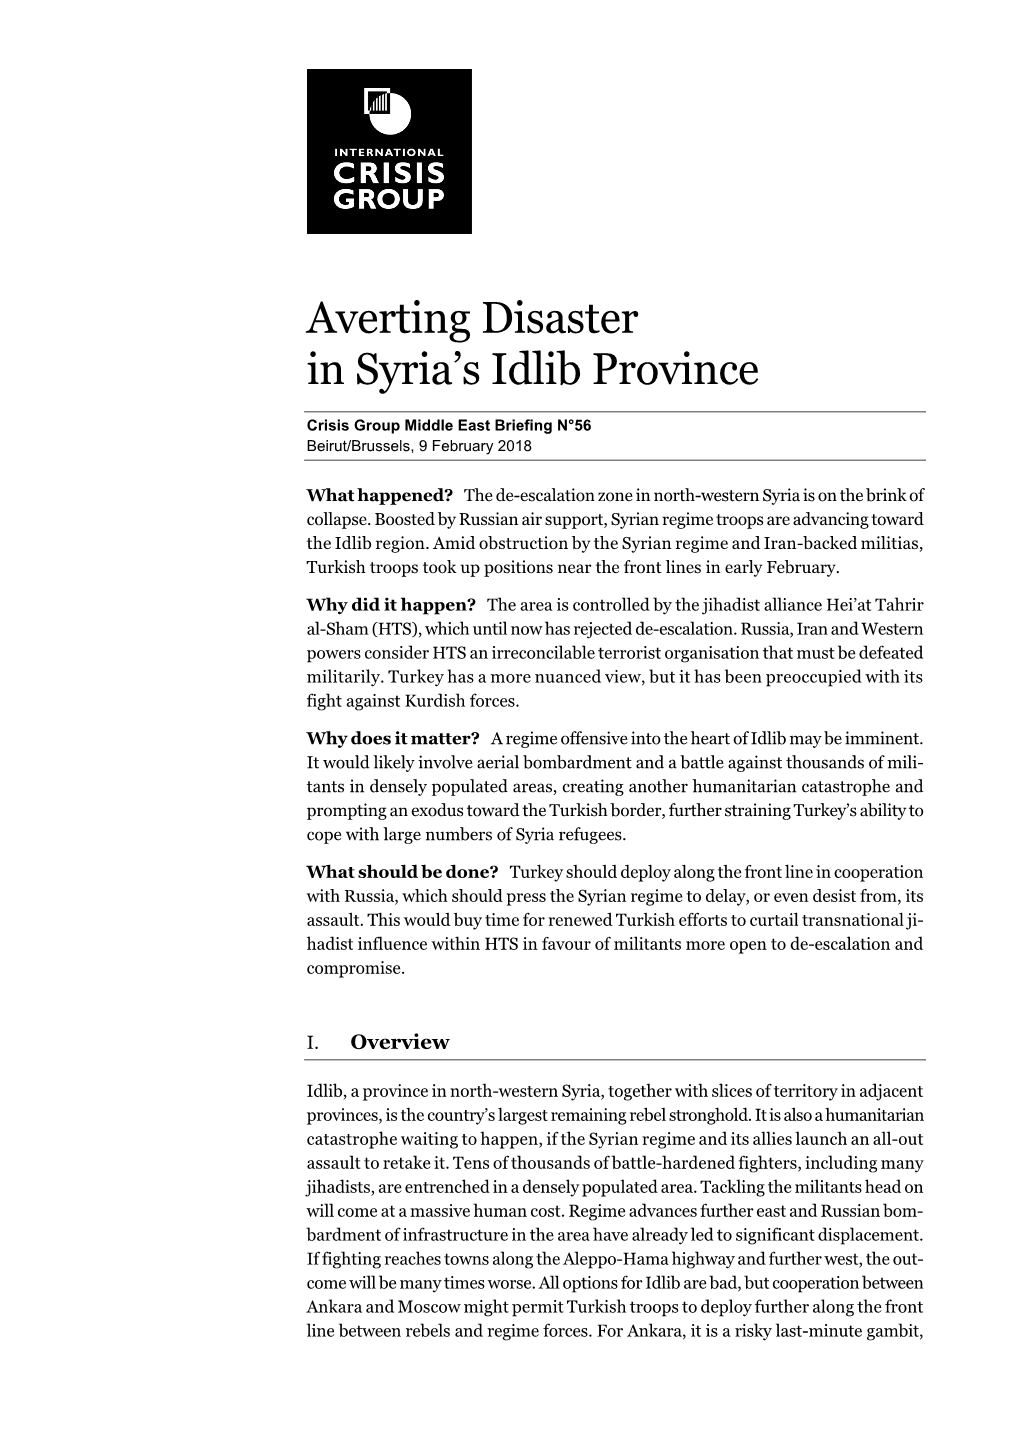 B056 Averting Disaster in Syrias Idlib Province